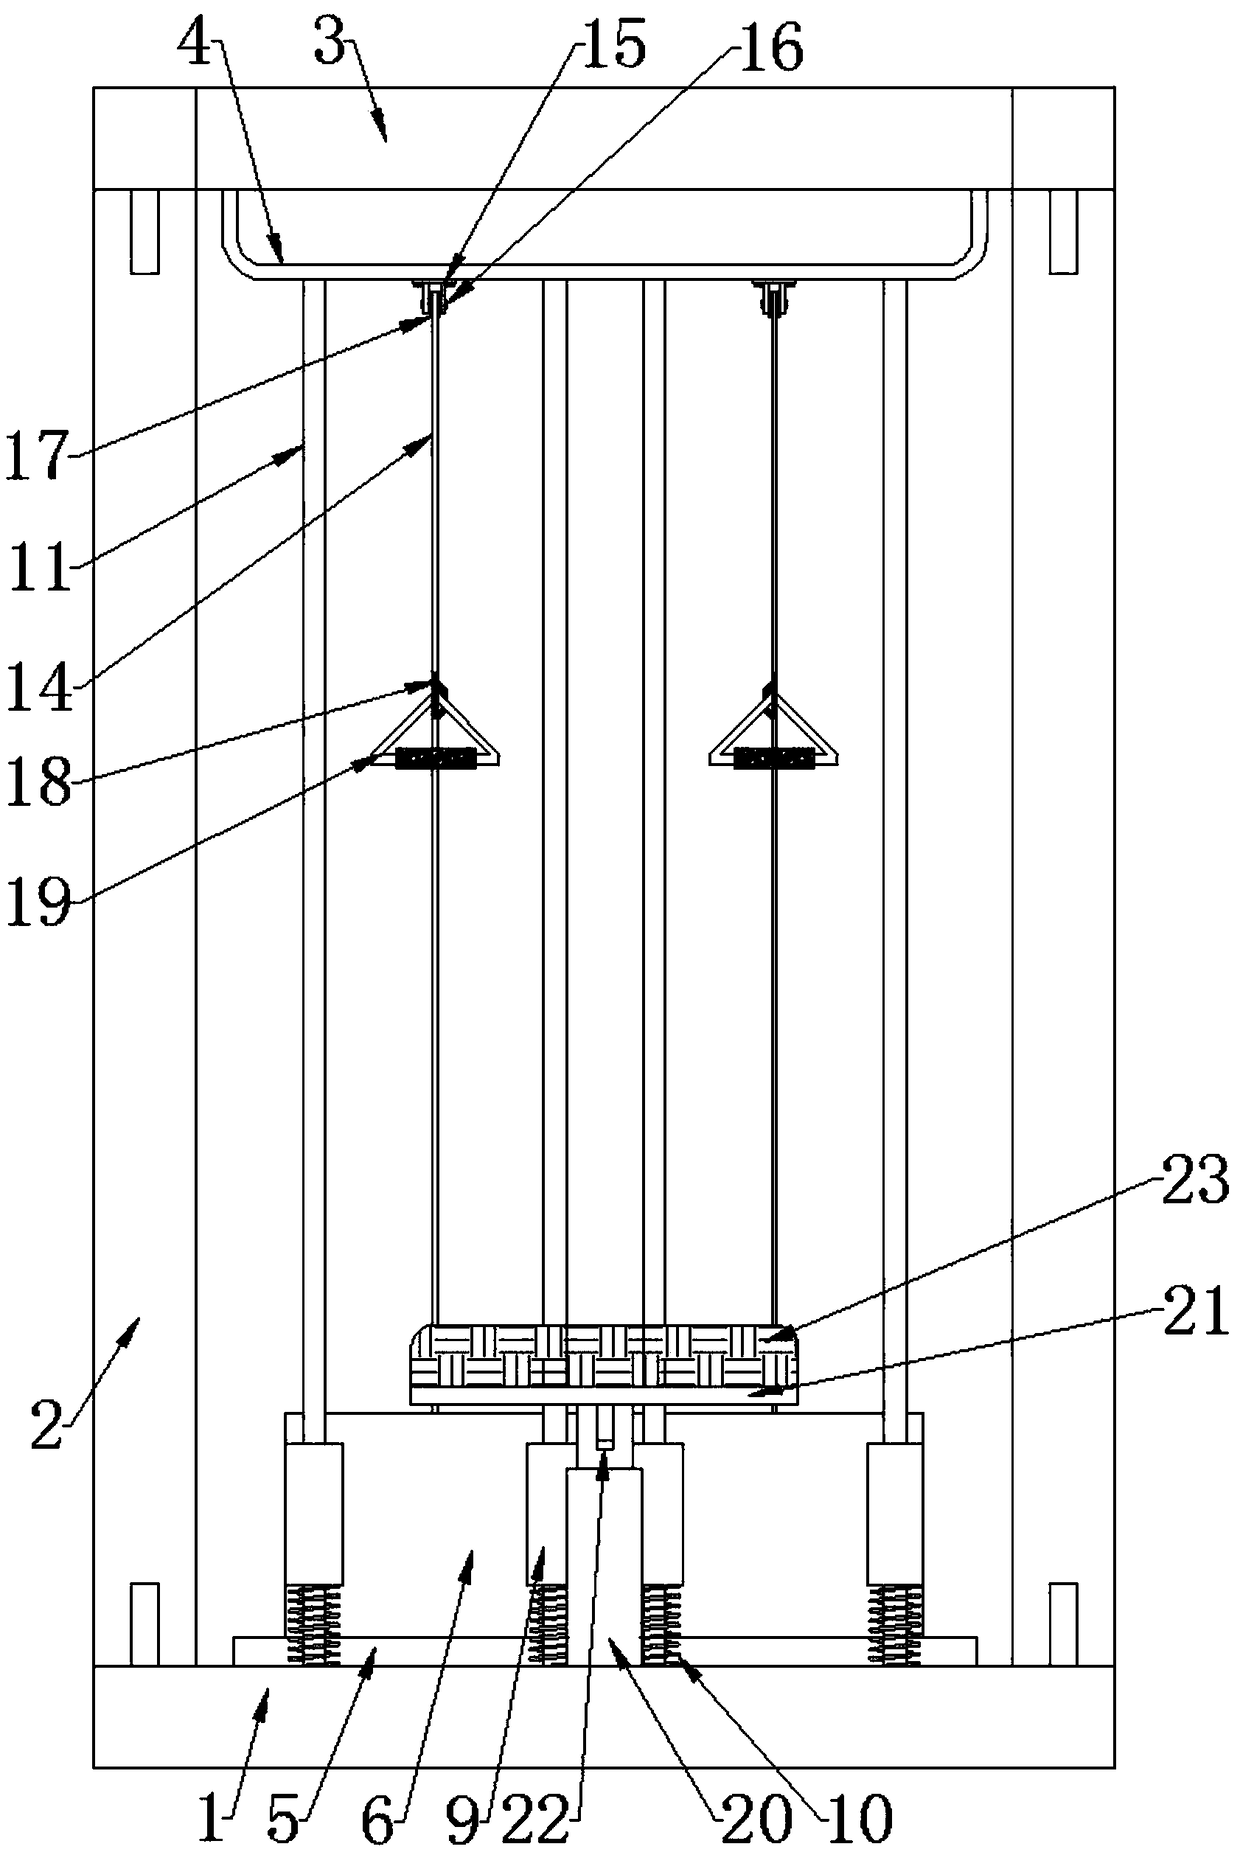 A strength exercise device and a method of using the same